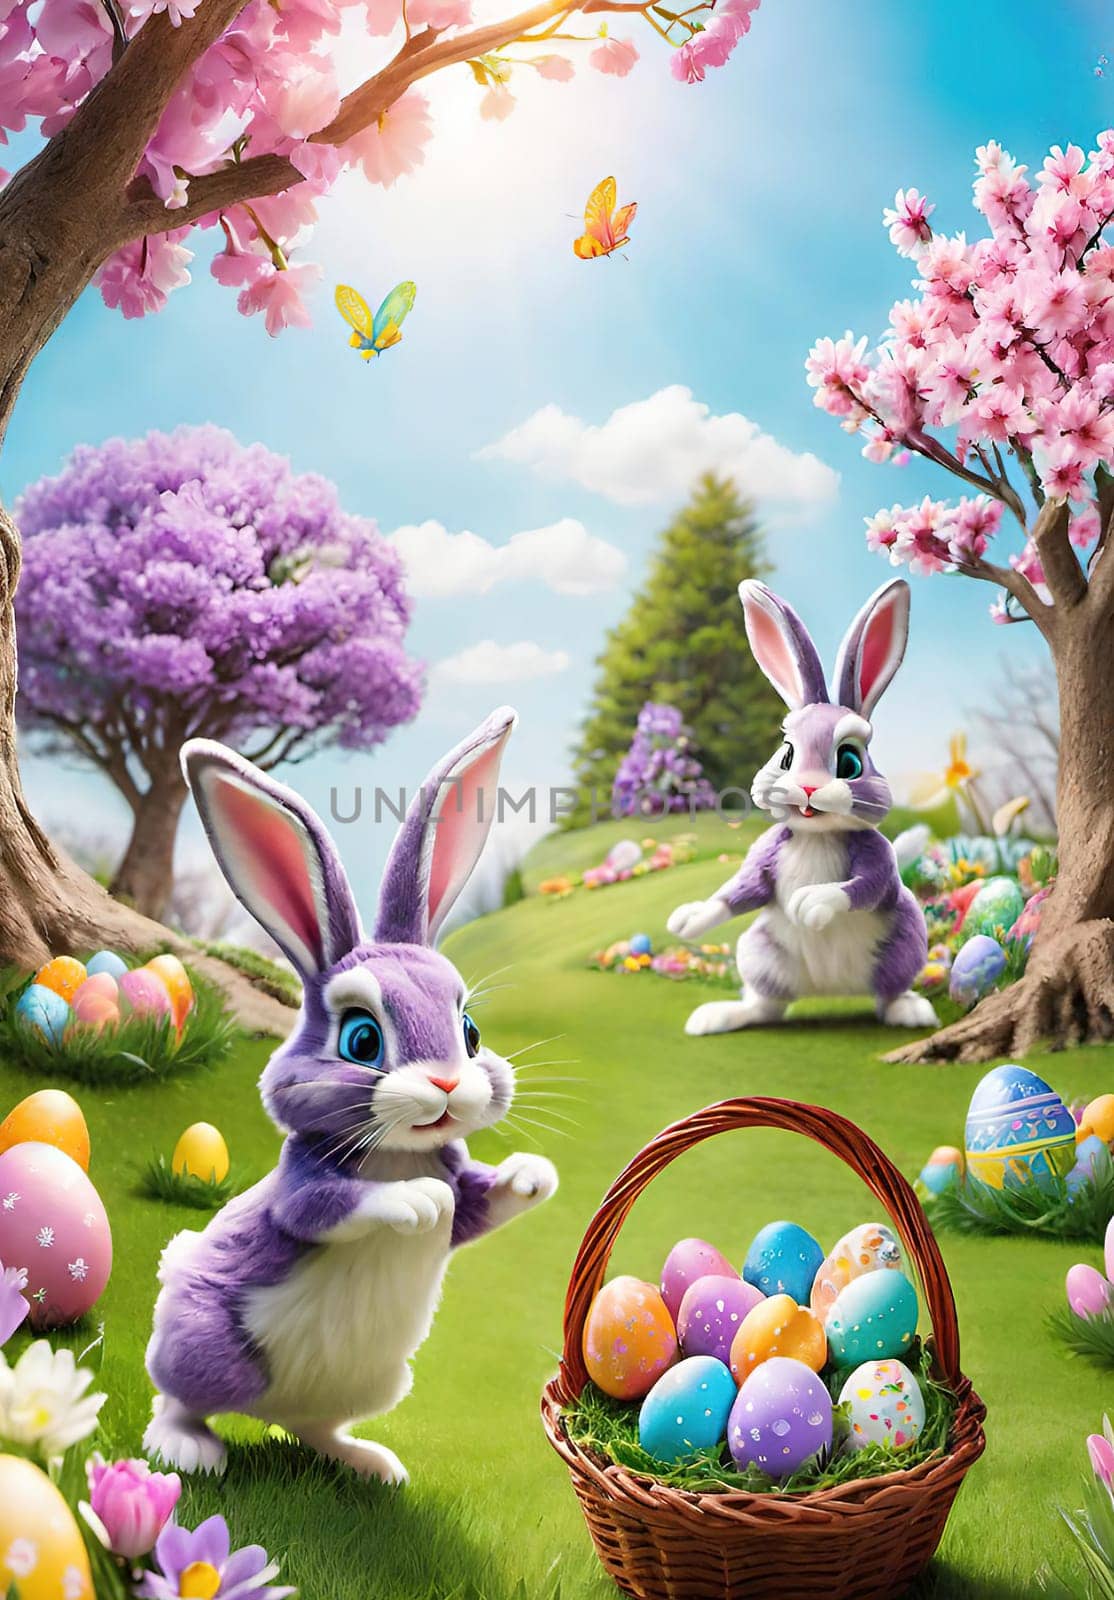 Easter bunny with basket of colorful eggs and flowers in the garden. by yilmazsavaskandag